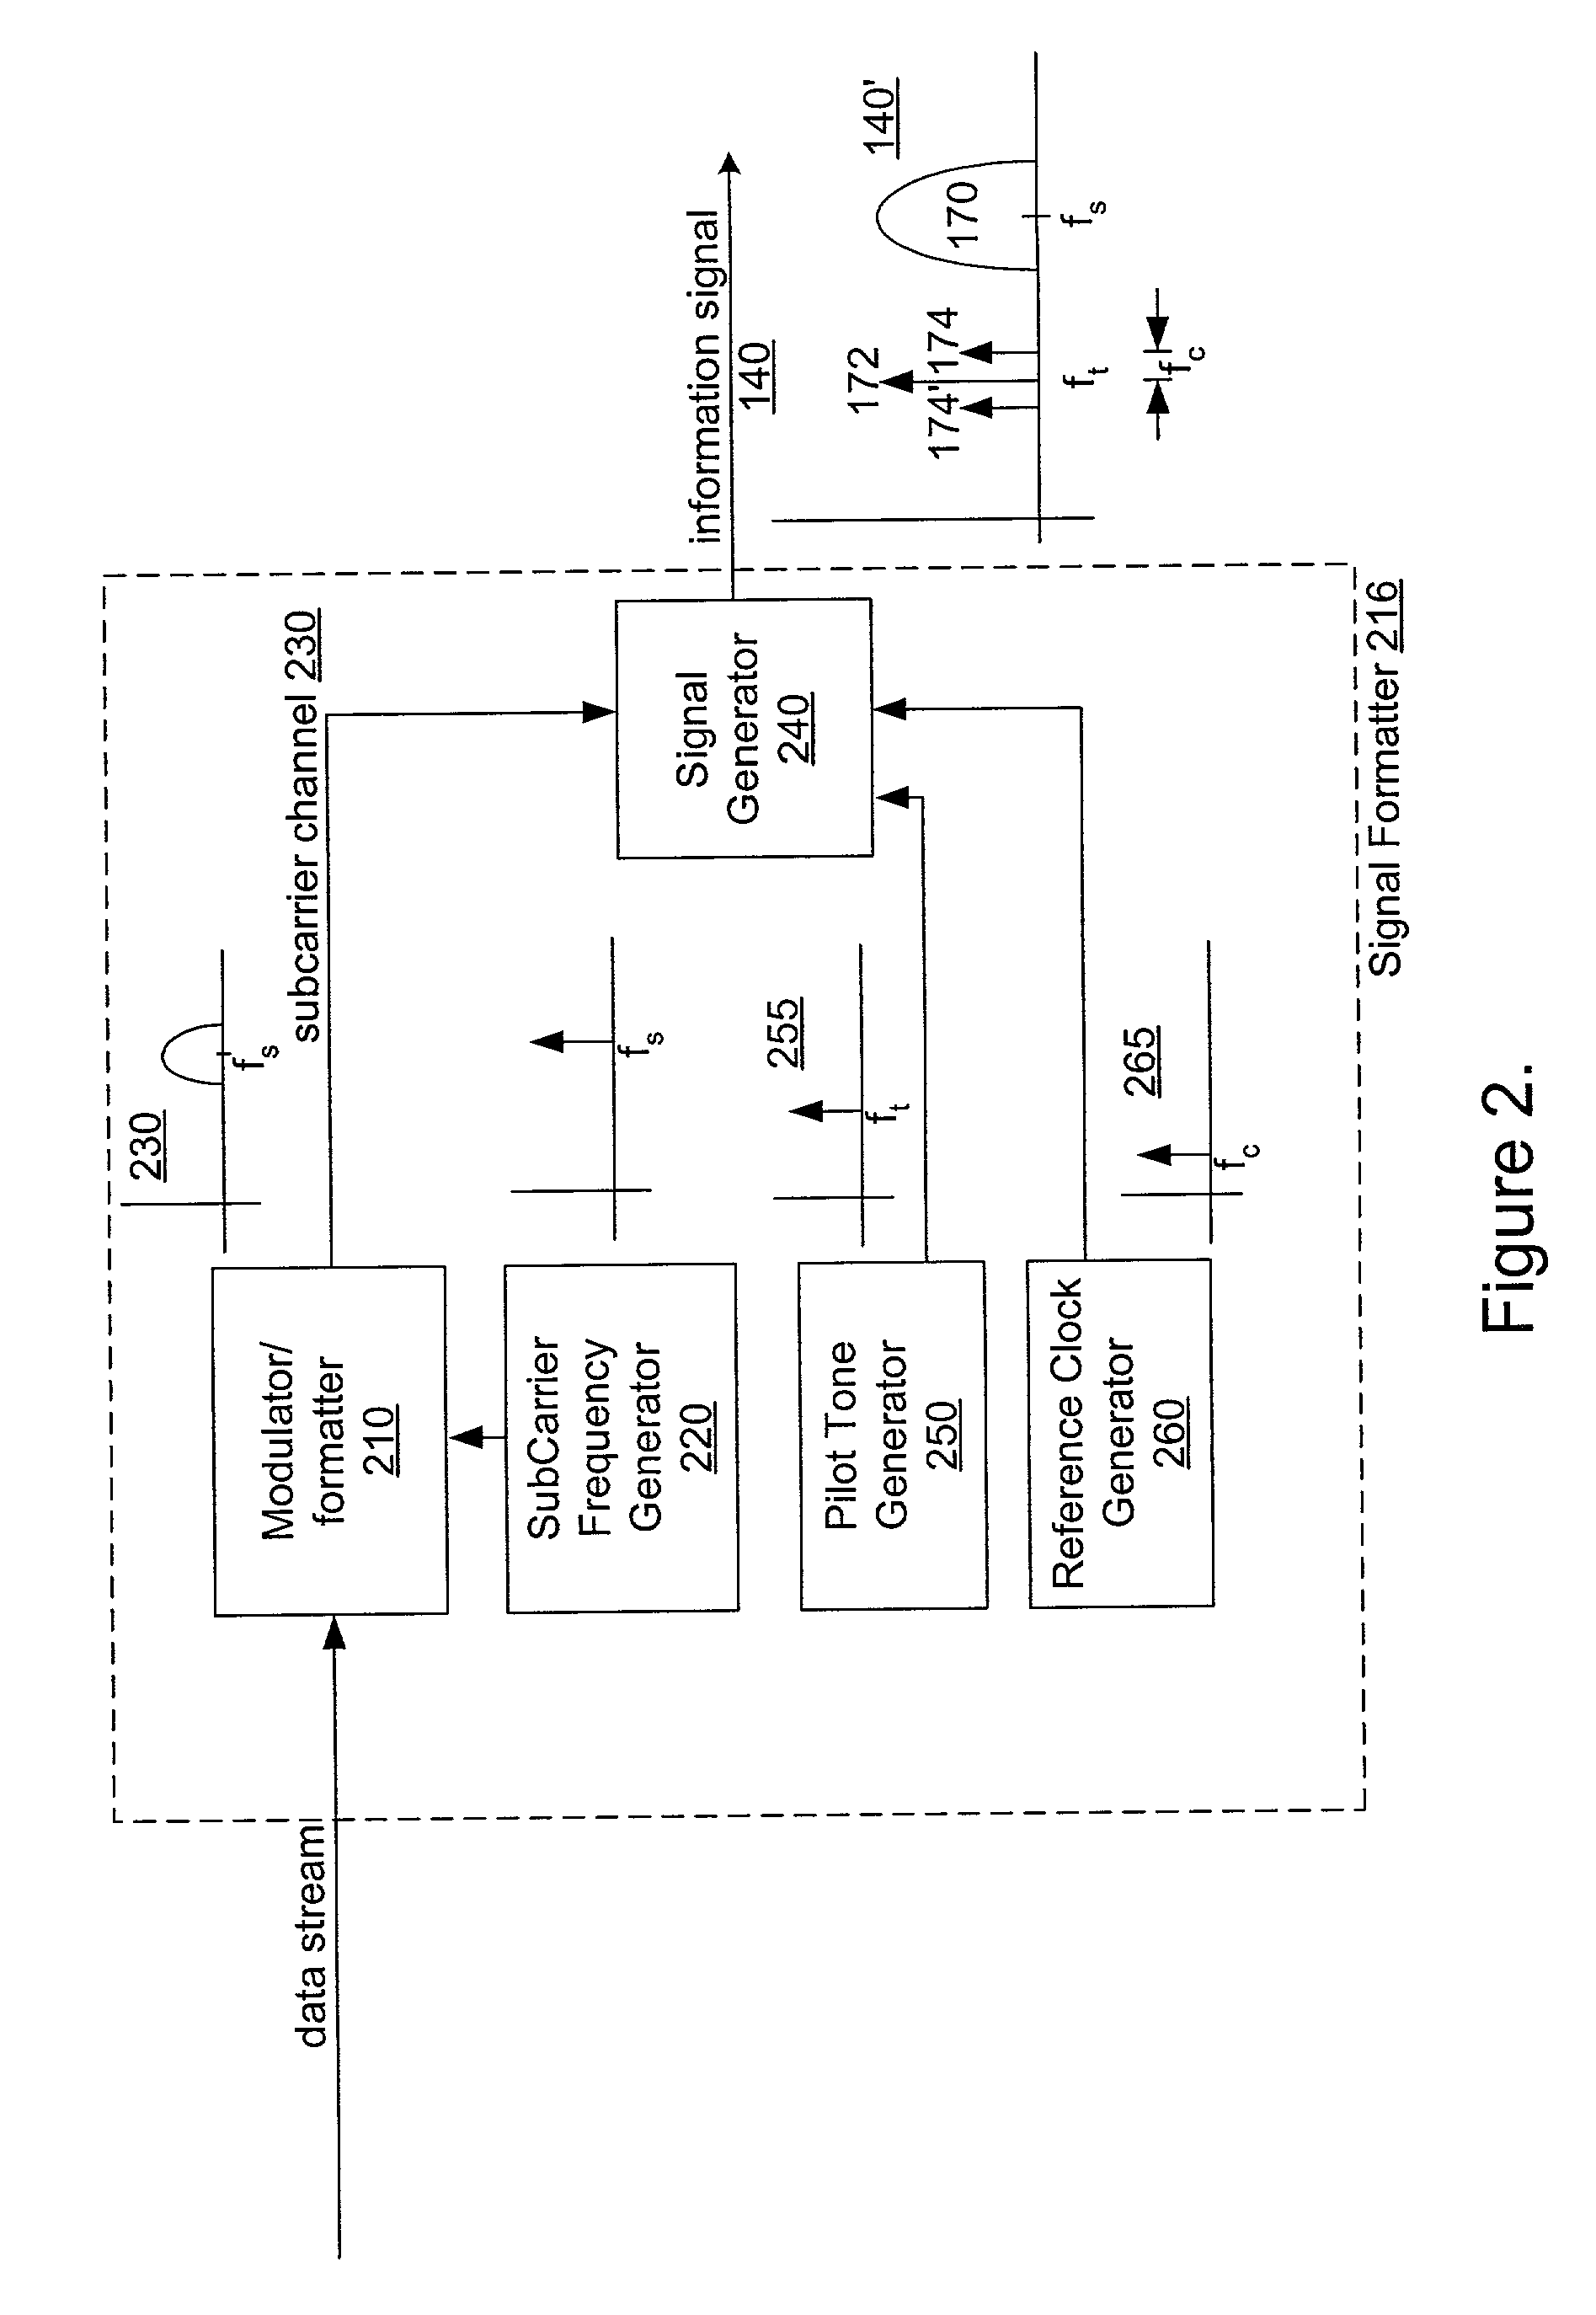 Optical transceiver using heterodyne detection and a transmitted reference clock